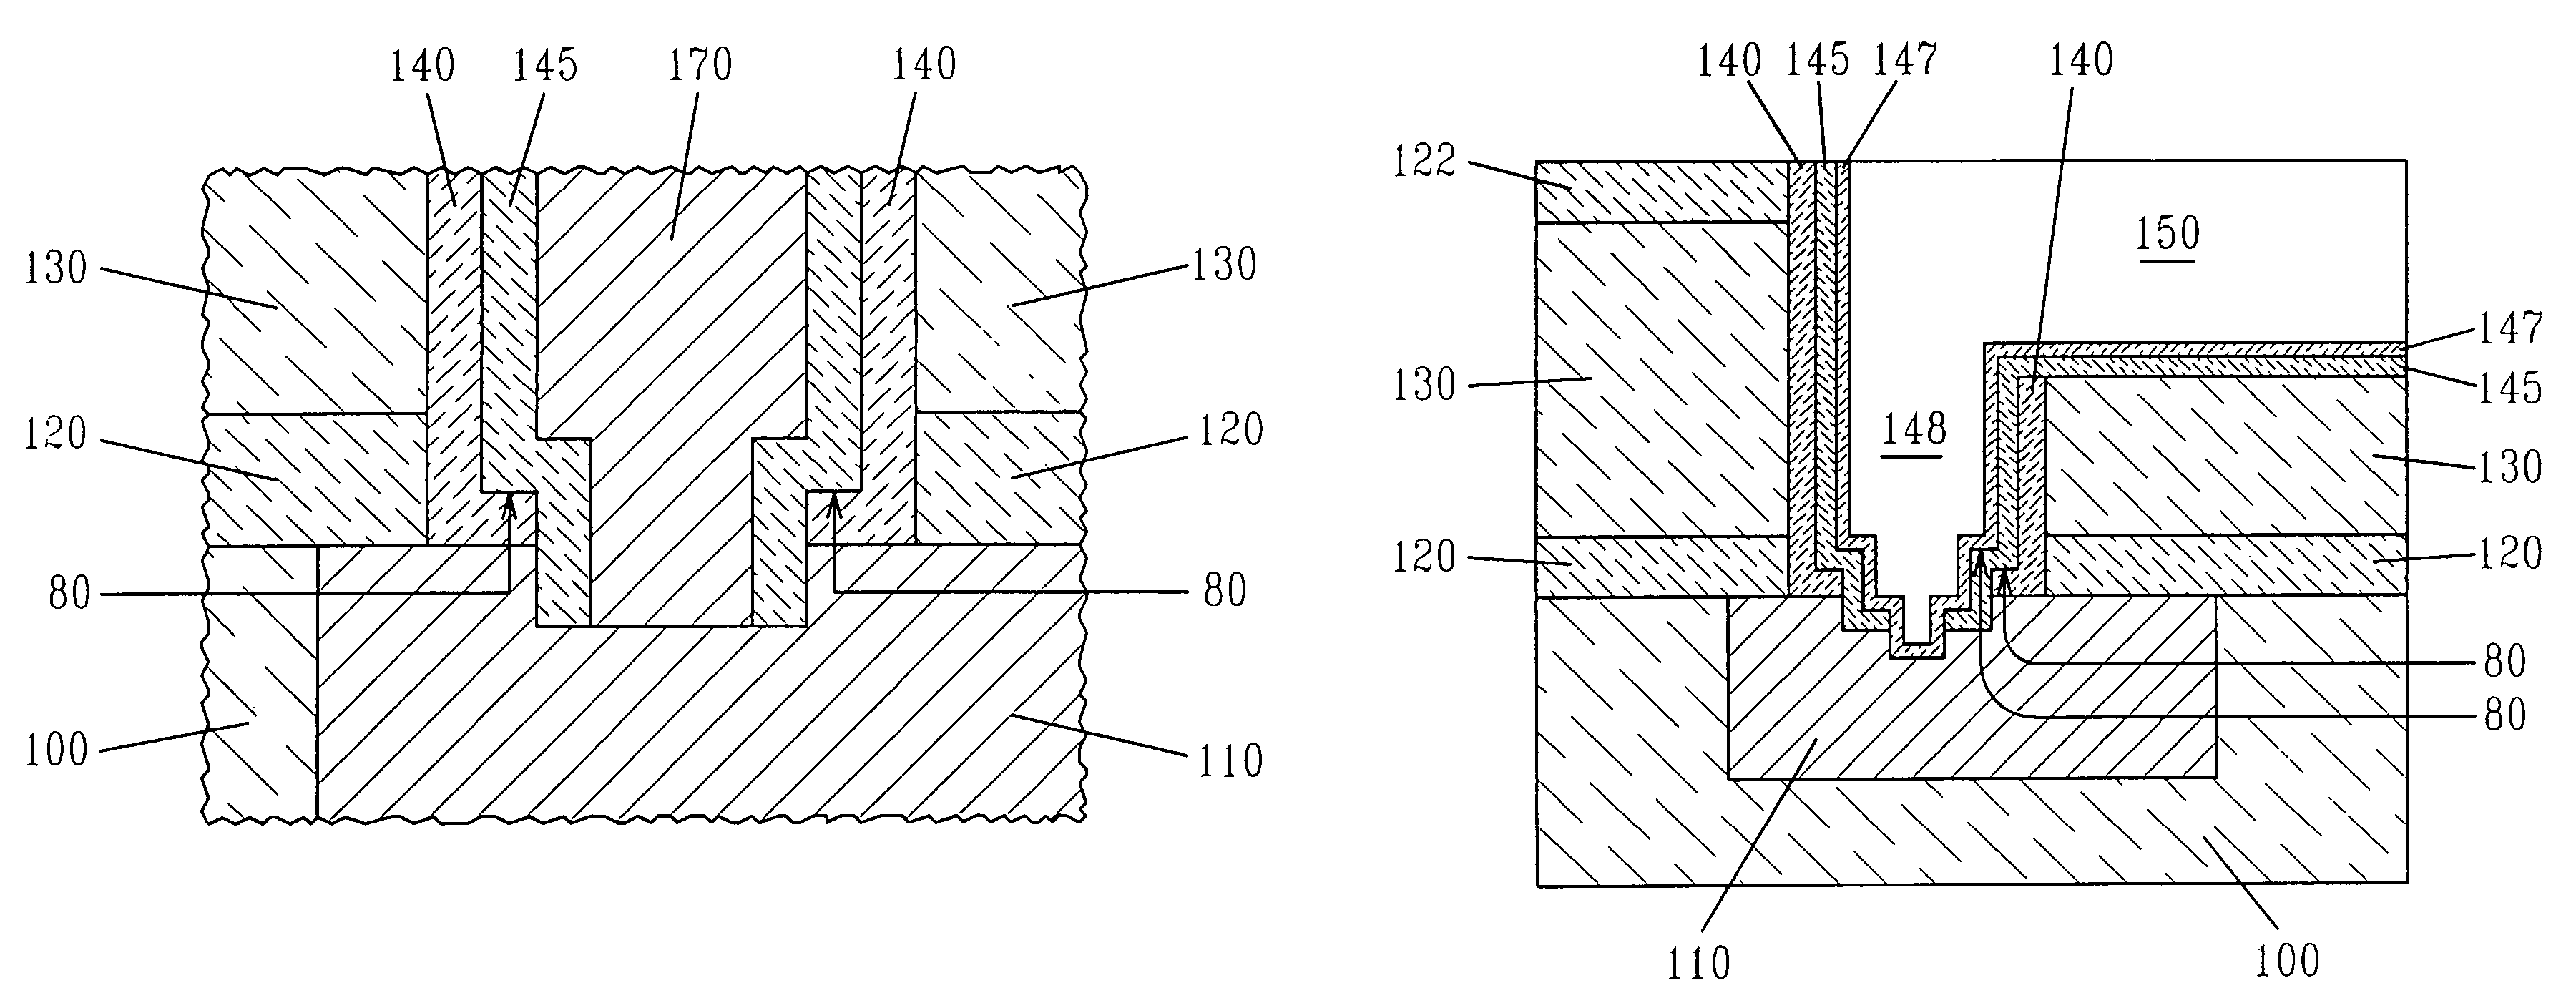 Modified via bottom structure for reliability enhancement